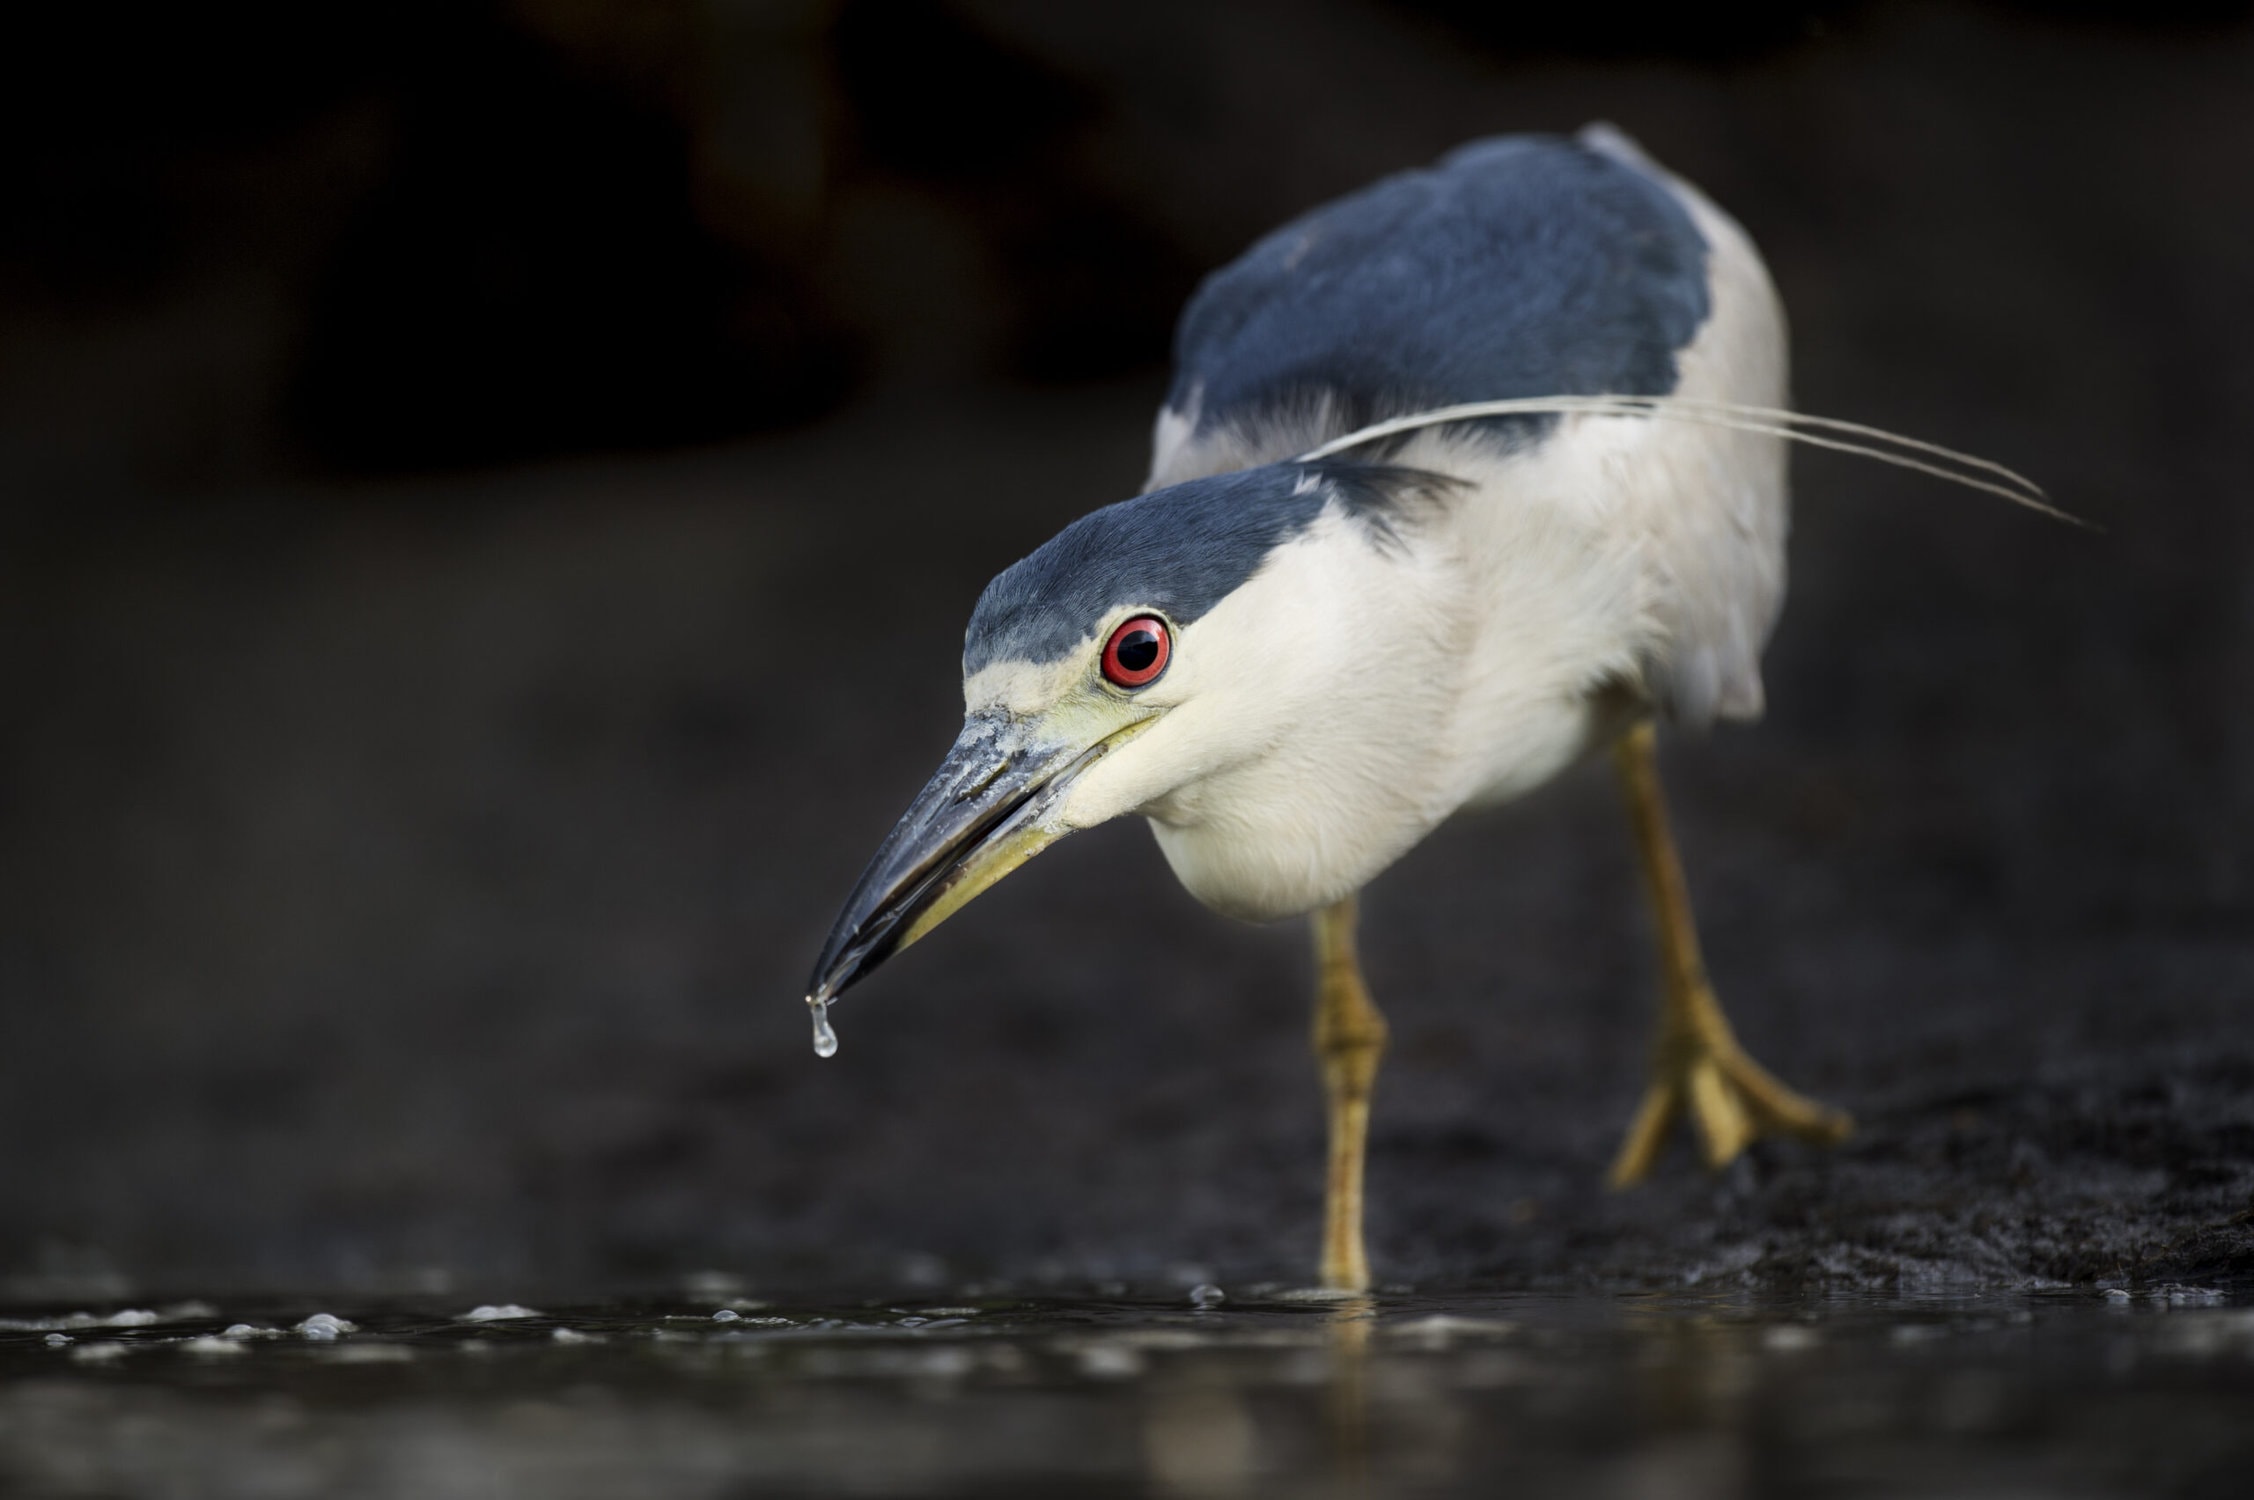 Species Highlight: The Black-crowned Evening Heron